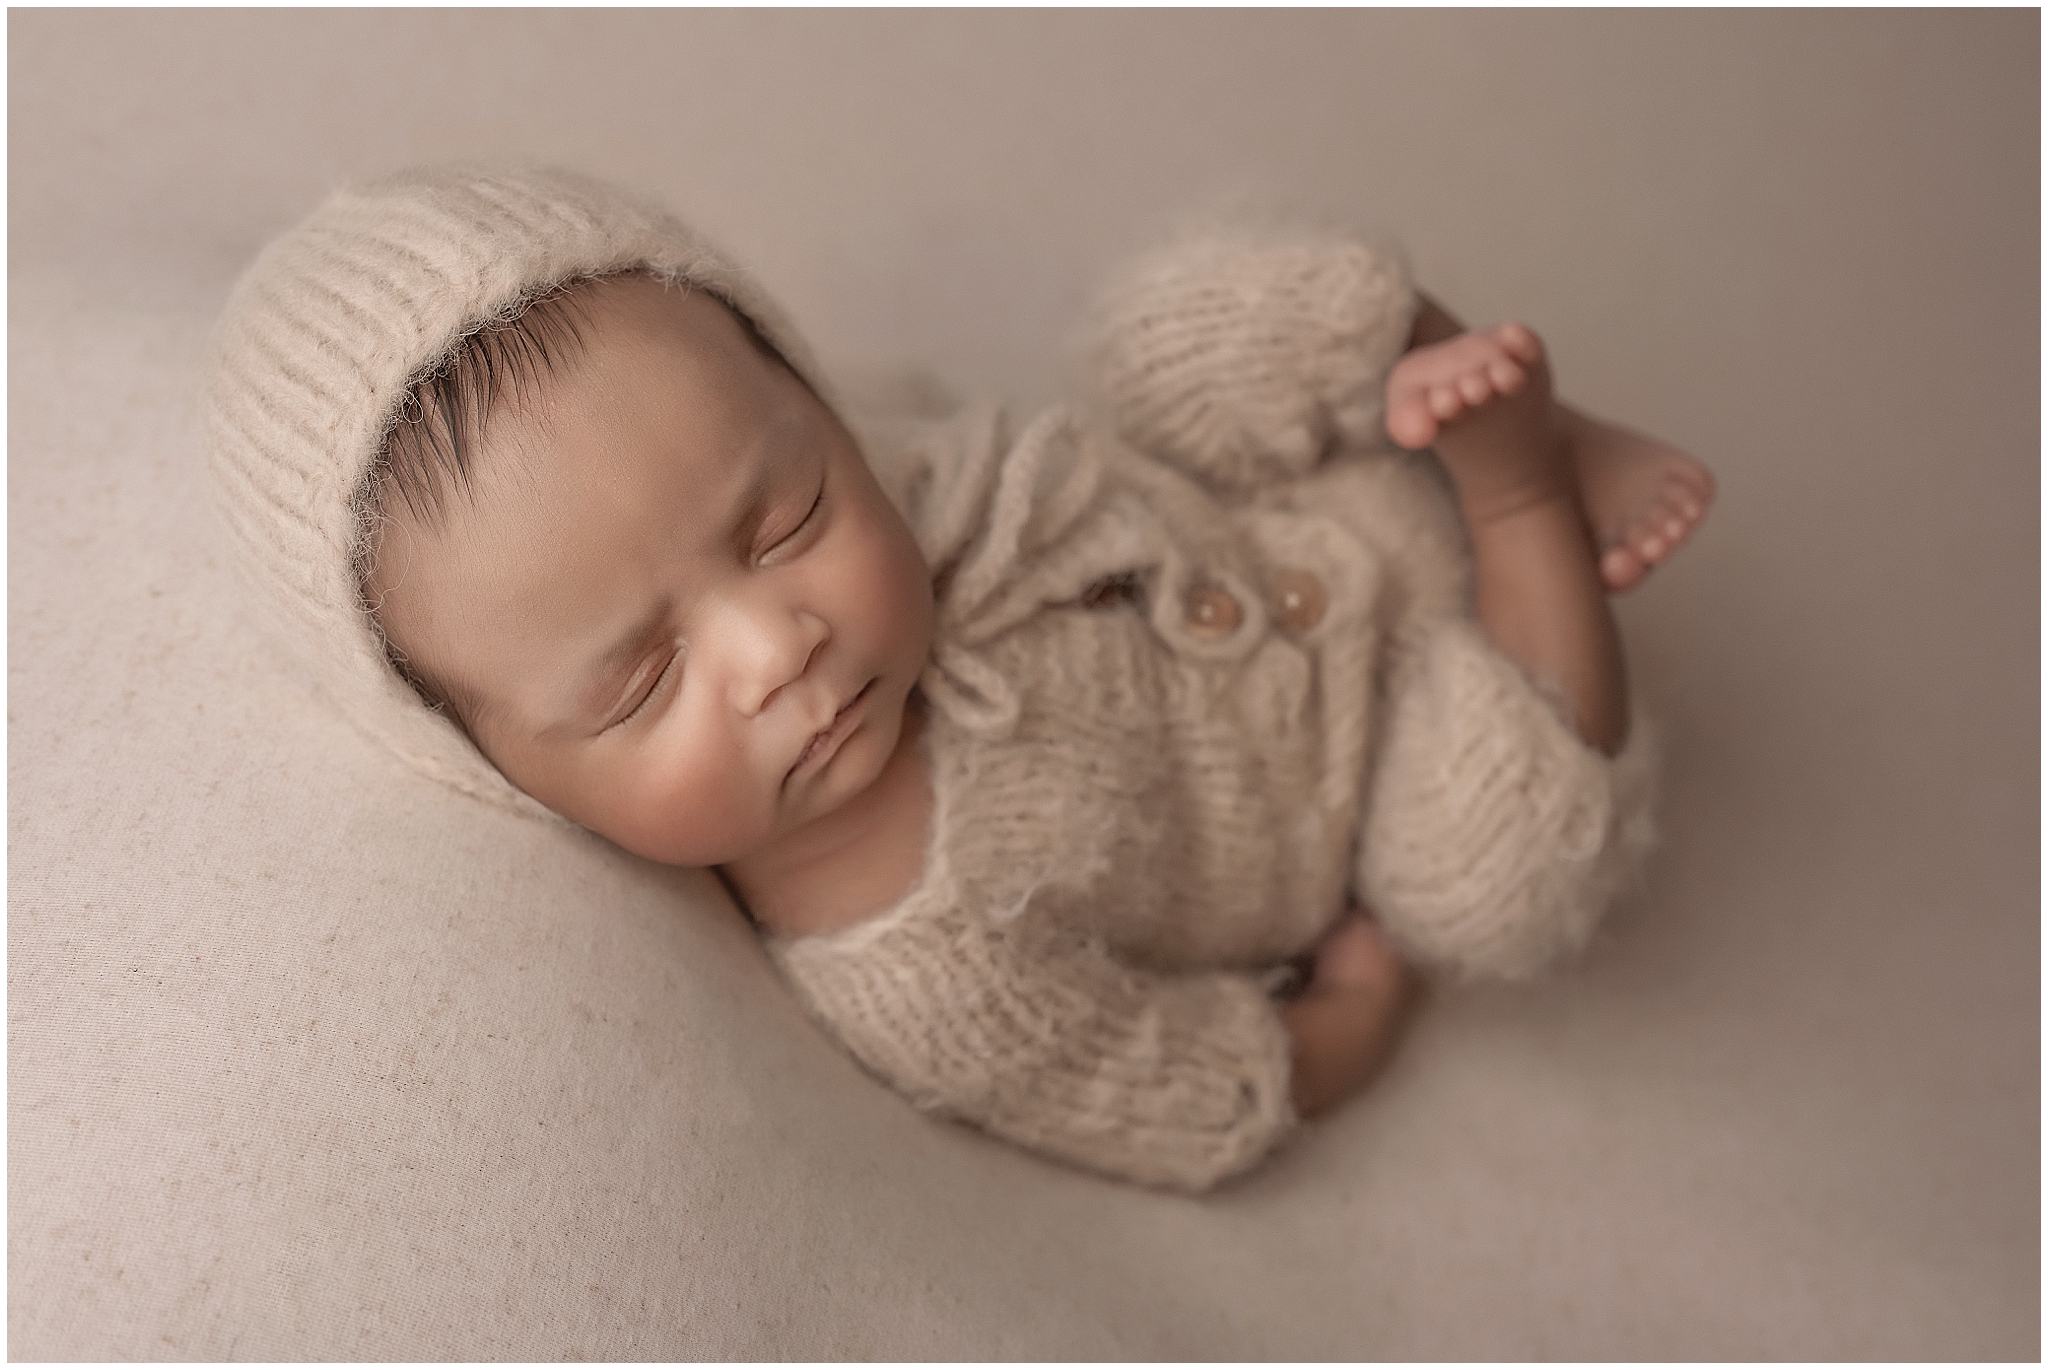 baby laying down and posing during newborn photography session at london ontario studio